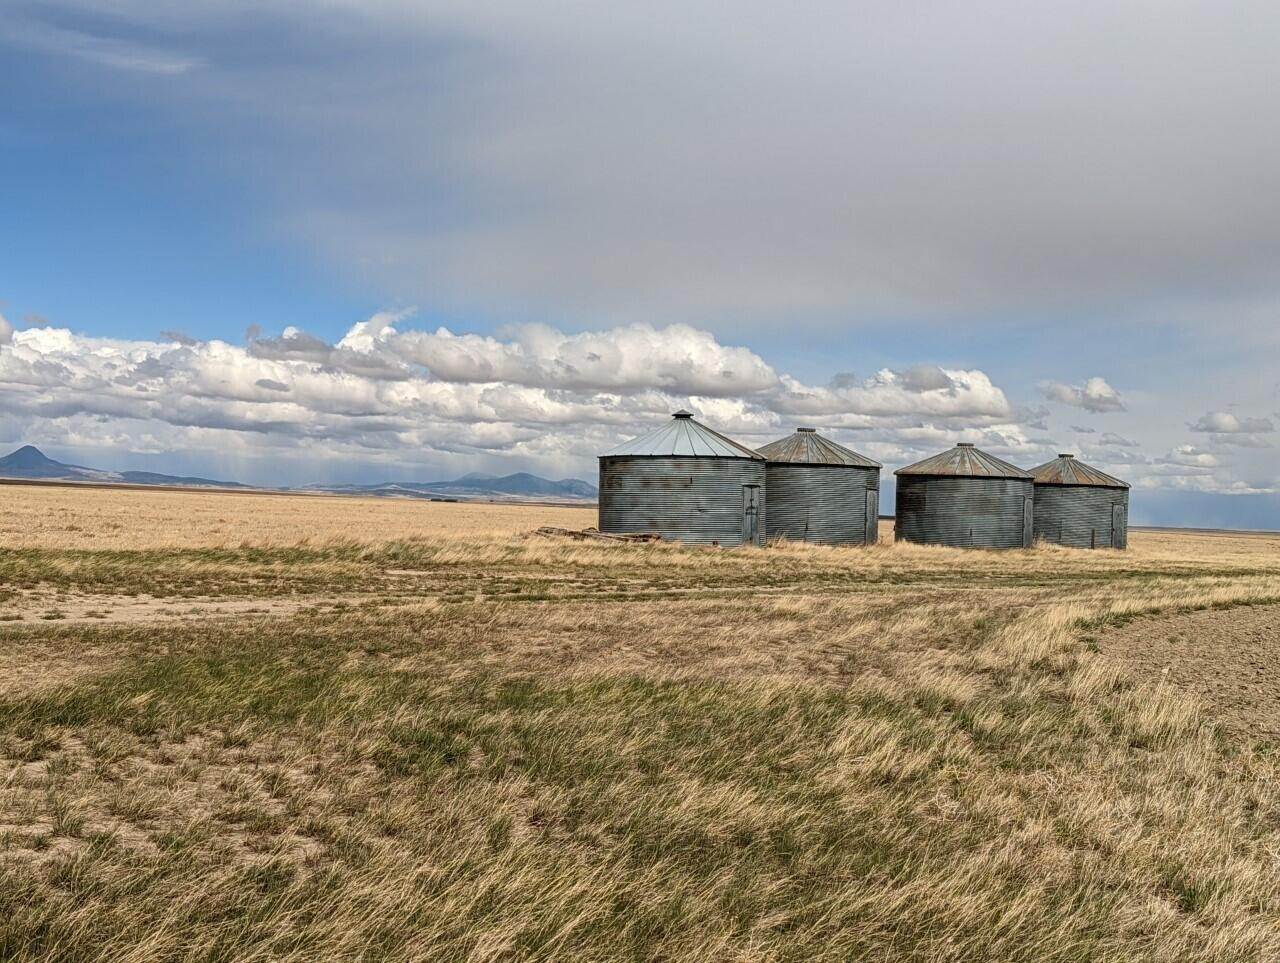 Farm / Agriculture for Sale at Nhn North Dunkirk Road, Shelby, Montana 59474 United States